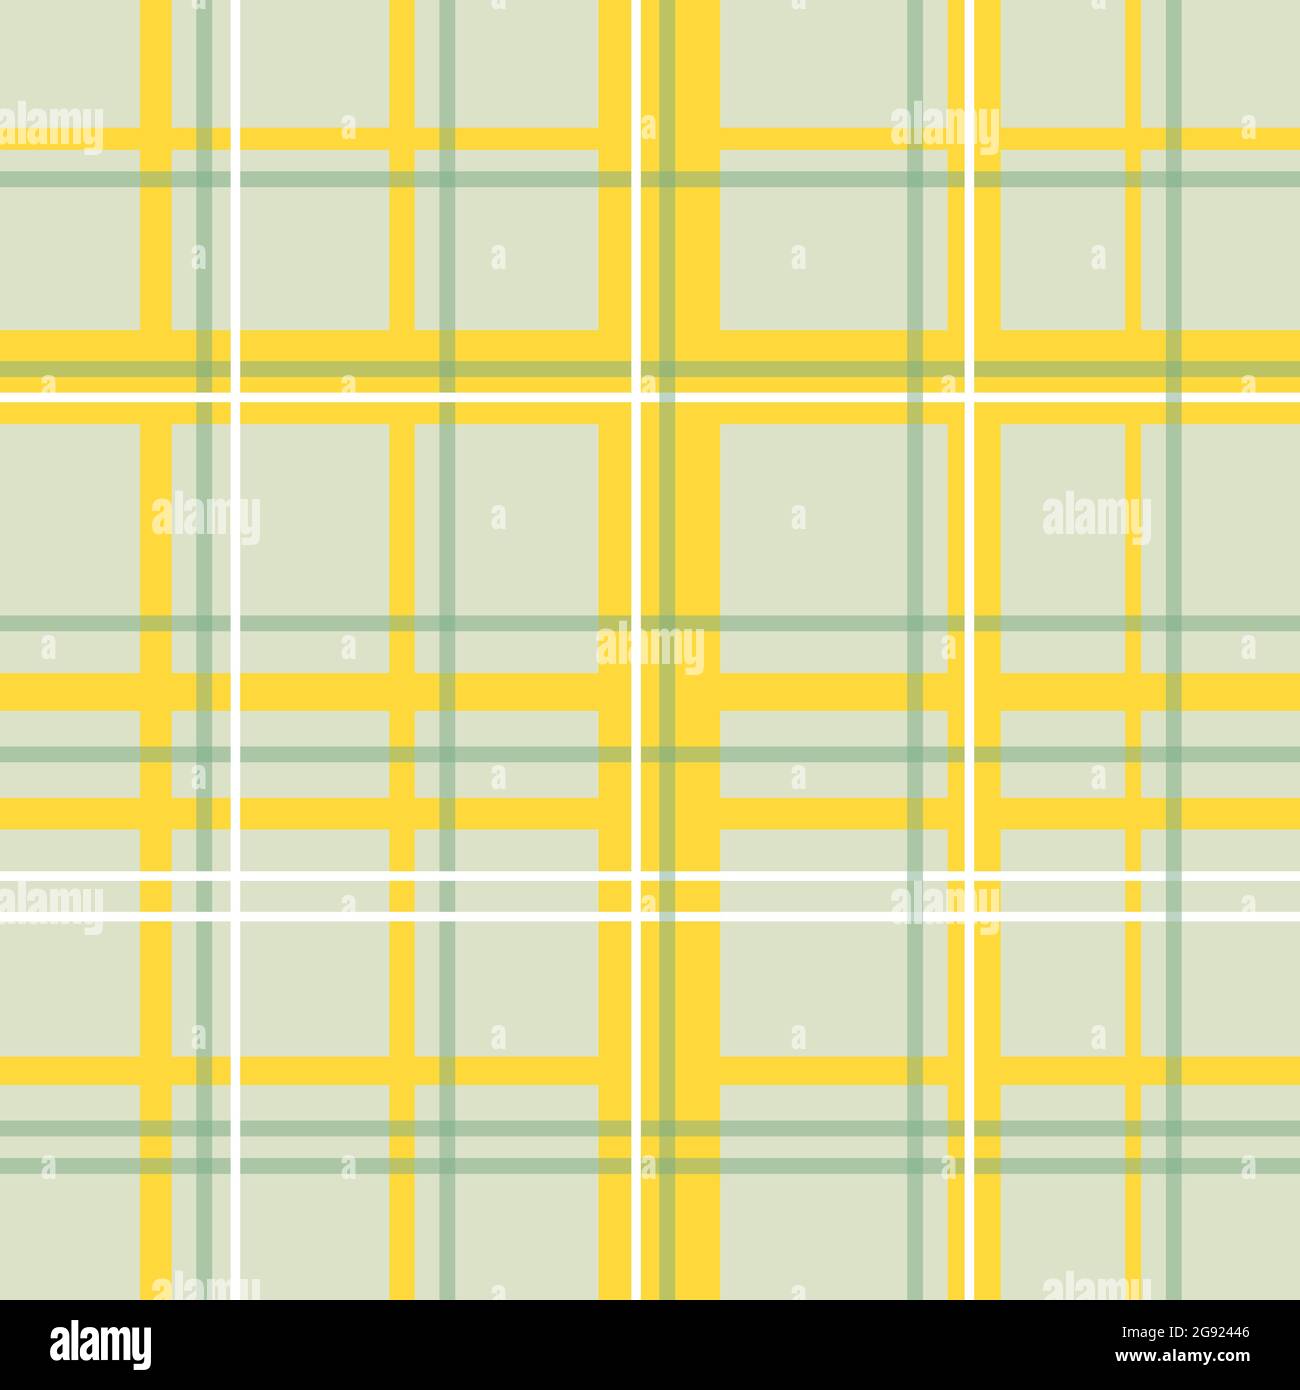 https://c8.alamy.com/comp/2G92446/seamless-pattern-with-plaid-tartan-lumberjack-ornament-warm-yellow-orange-beige-brown-gingham-buffalo-plaid-print-for-thanksgiving-design-wrapping-paper-decoration-abstract-geometric-traditional-background-2G92446.jpg